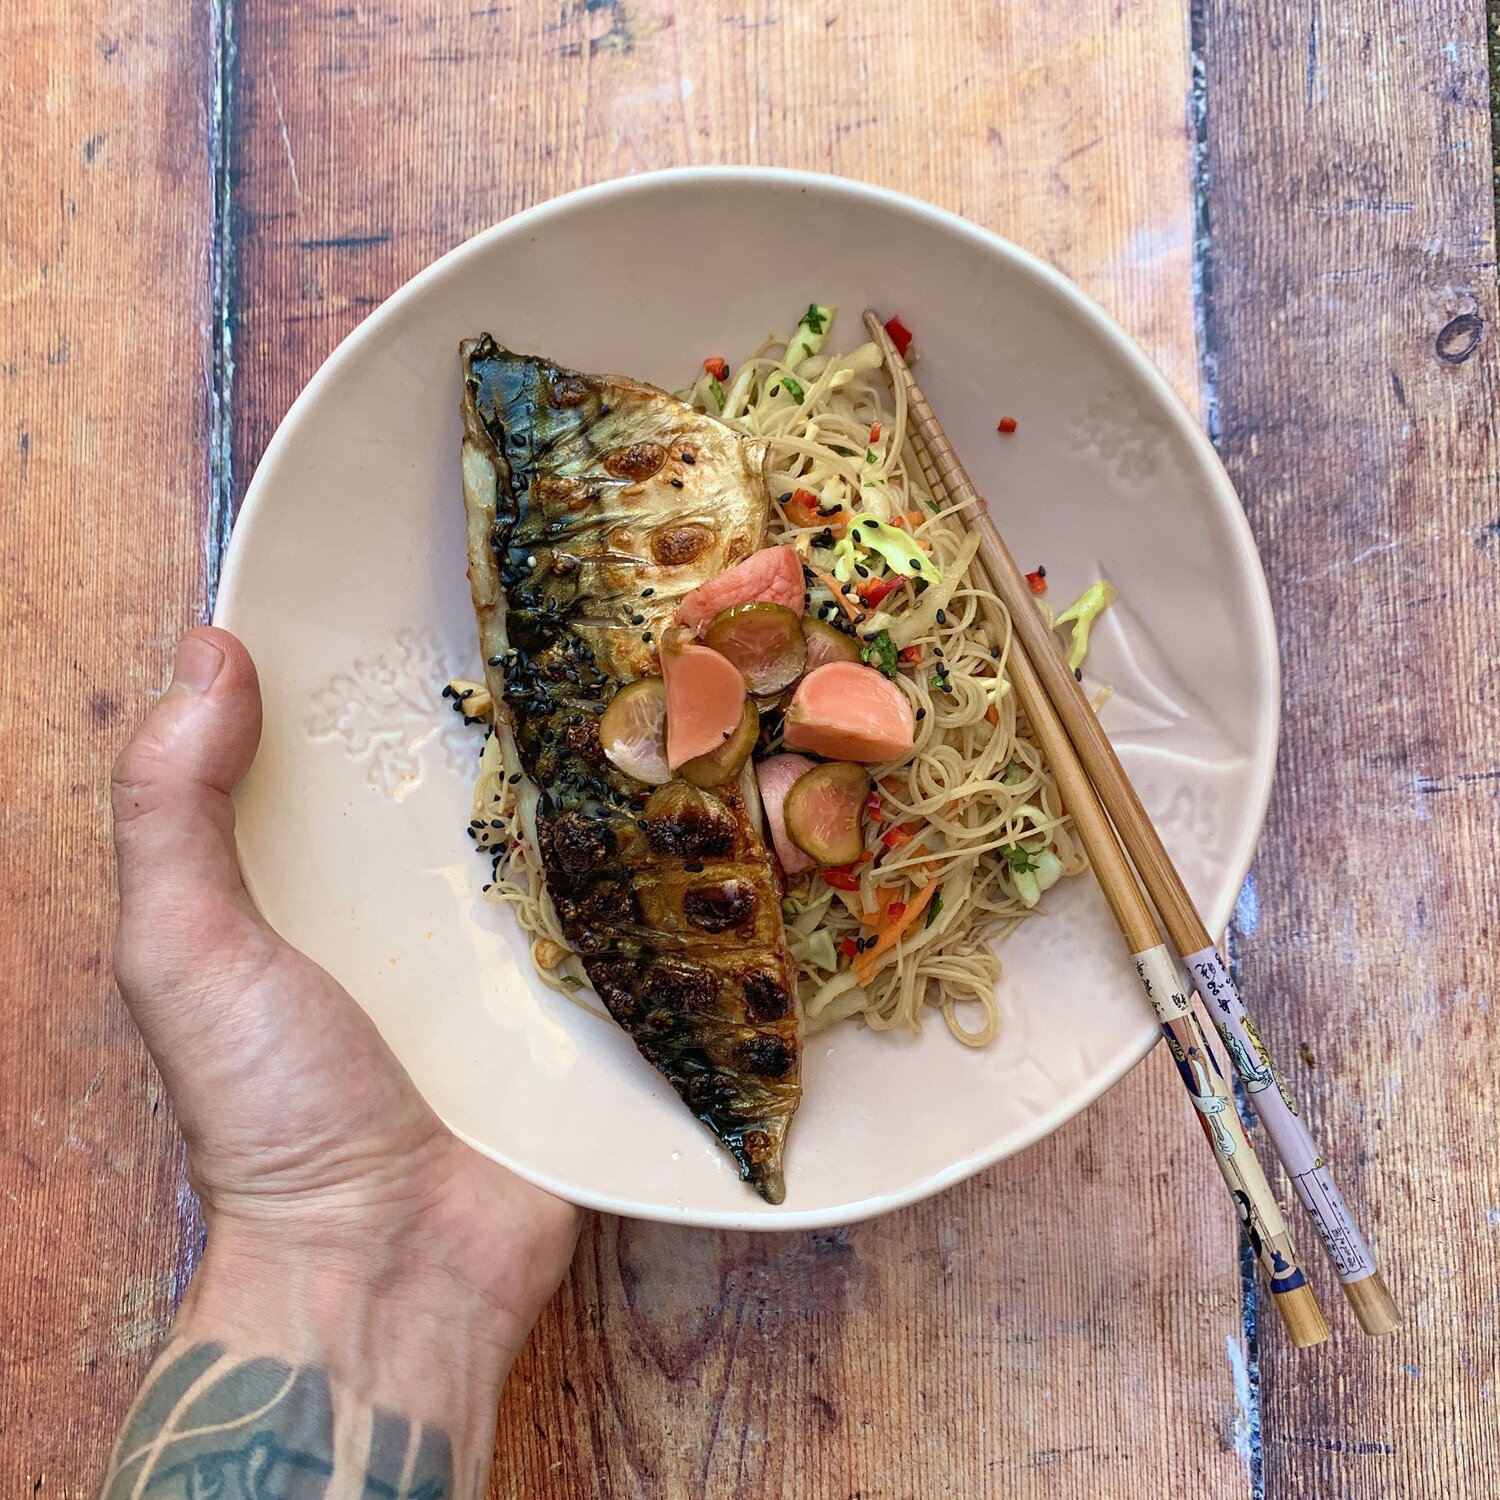 Honest Foods London - Barbecue sweet soy mackerel with brown rice noodles